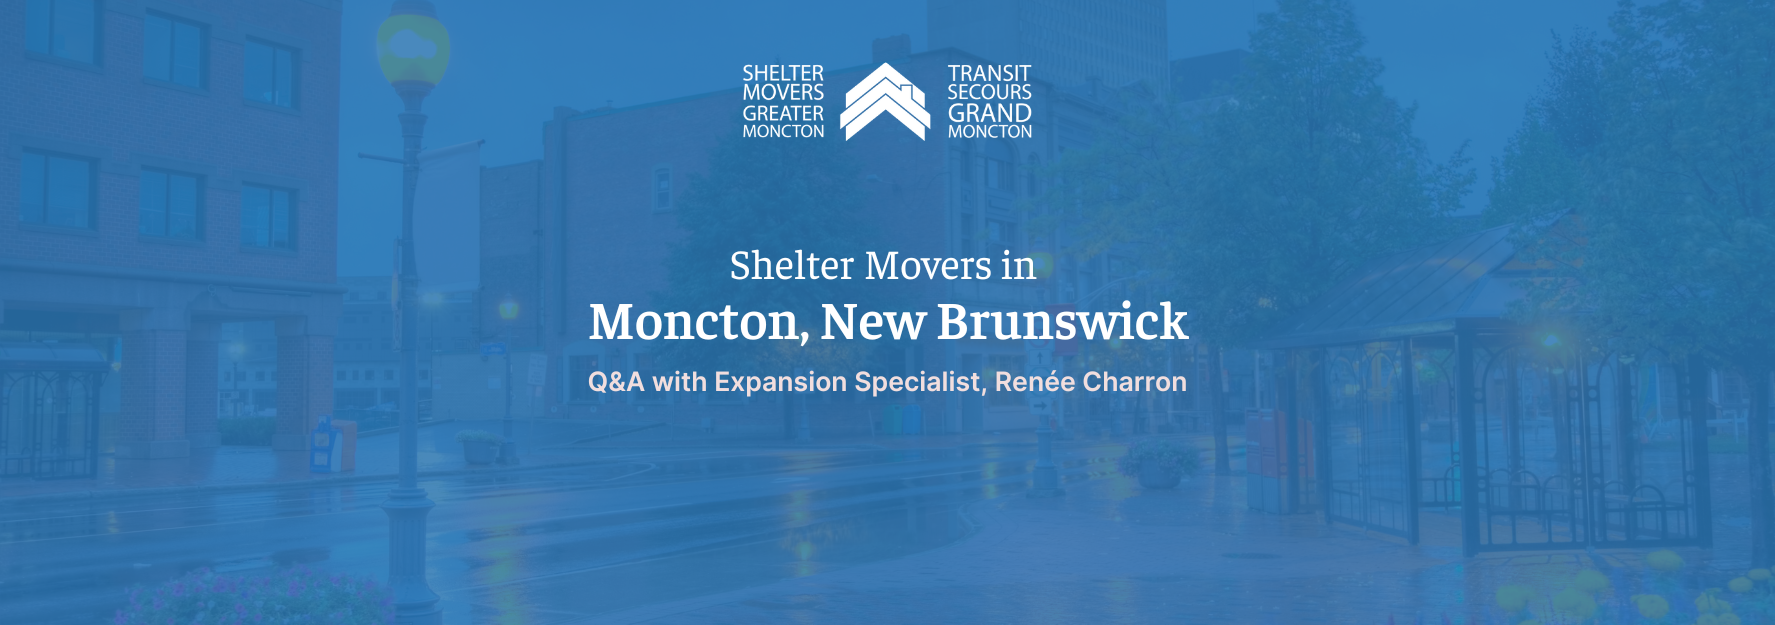 Shelter Movers in Moncton, New Brunswick: Q&A with Expansion Specialist, Renée Charron